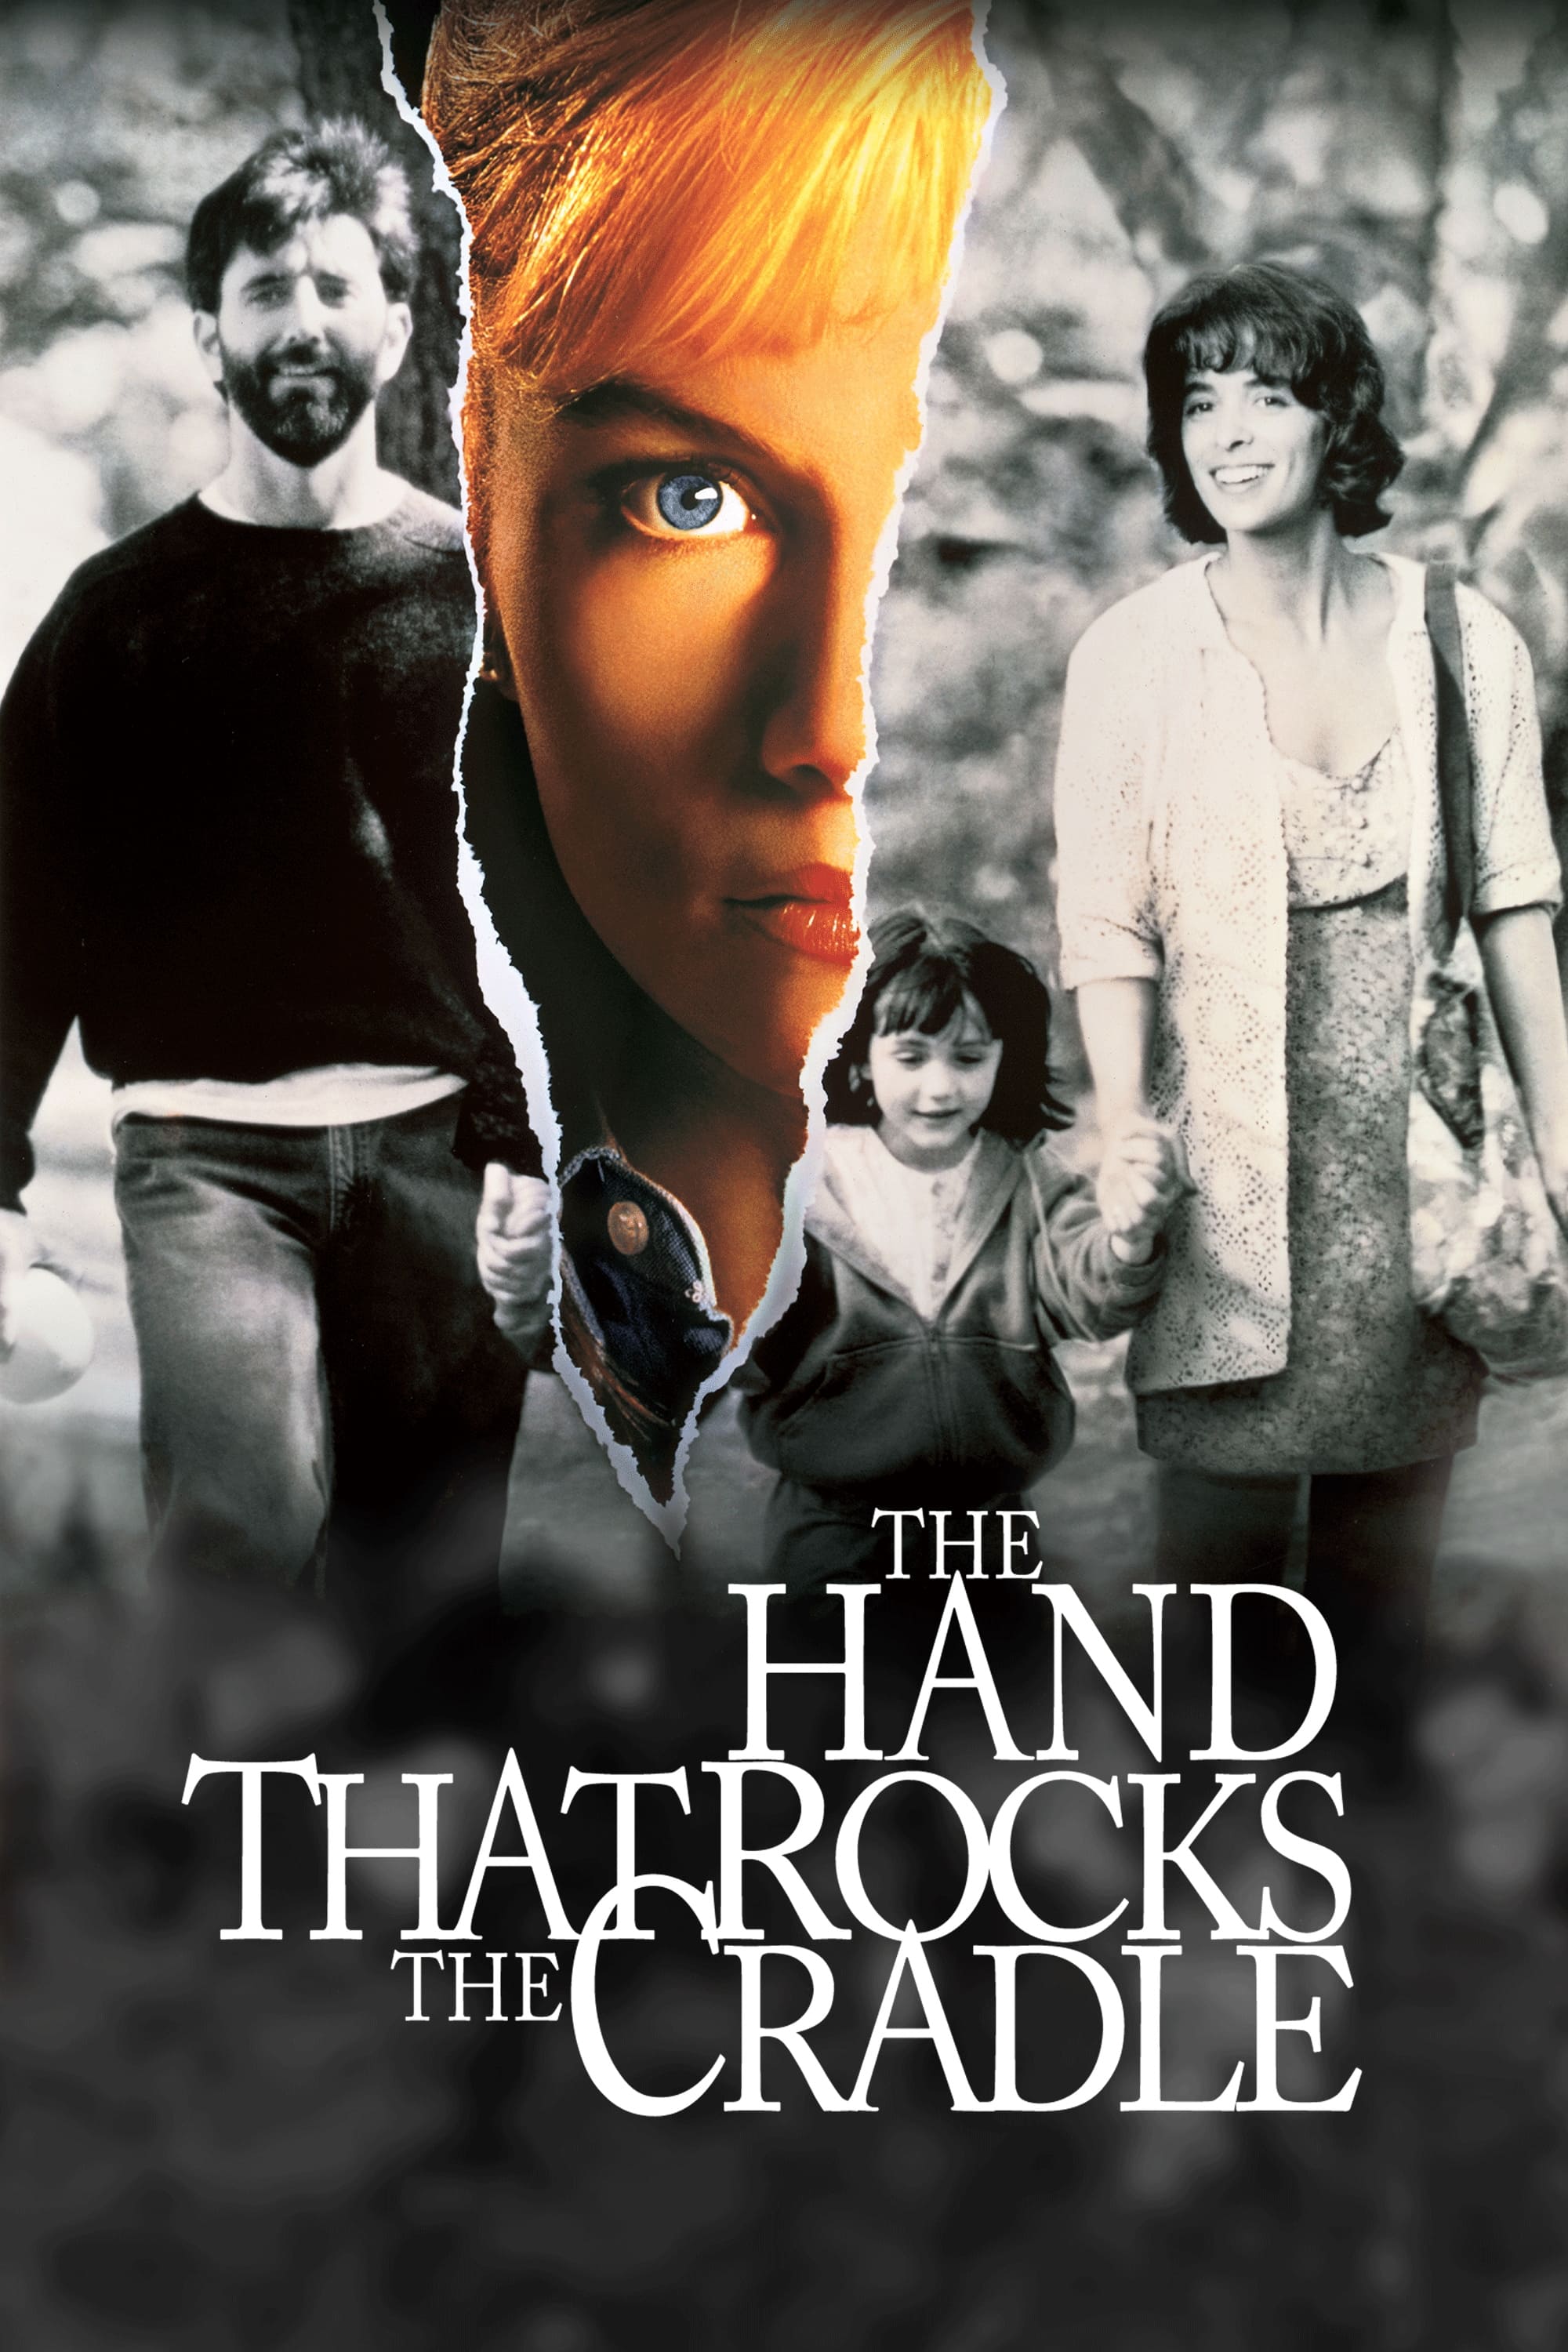 The Hand that Rocks the Cradle (1992)